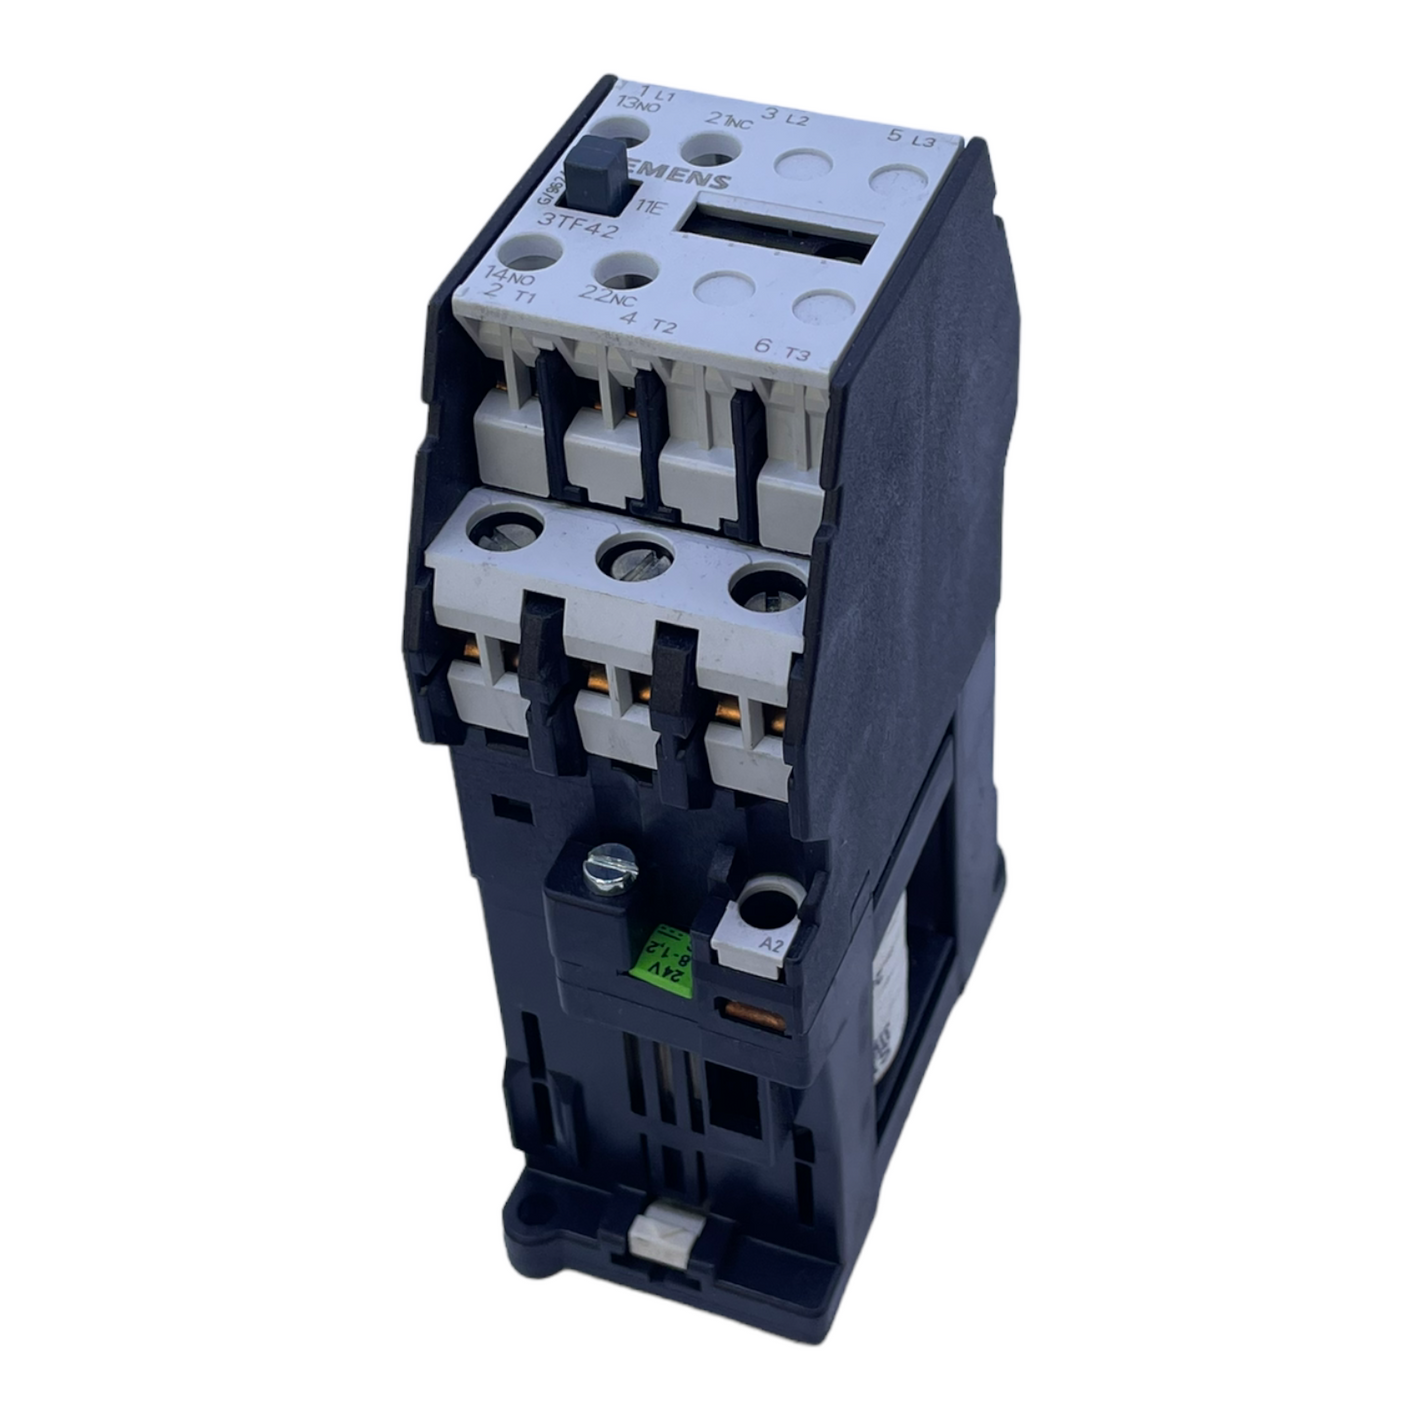 Siemens 3TF42 power contactor for industrial use Power contactor 24V DC